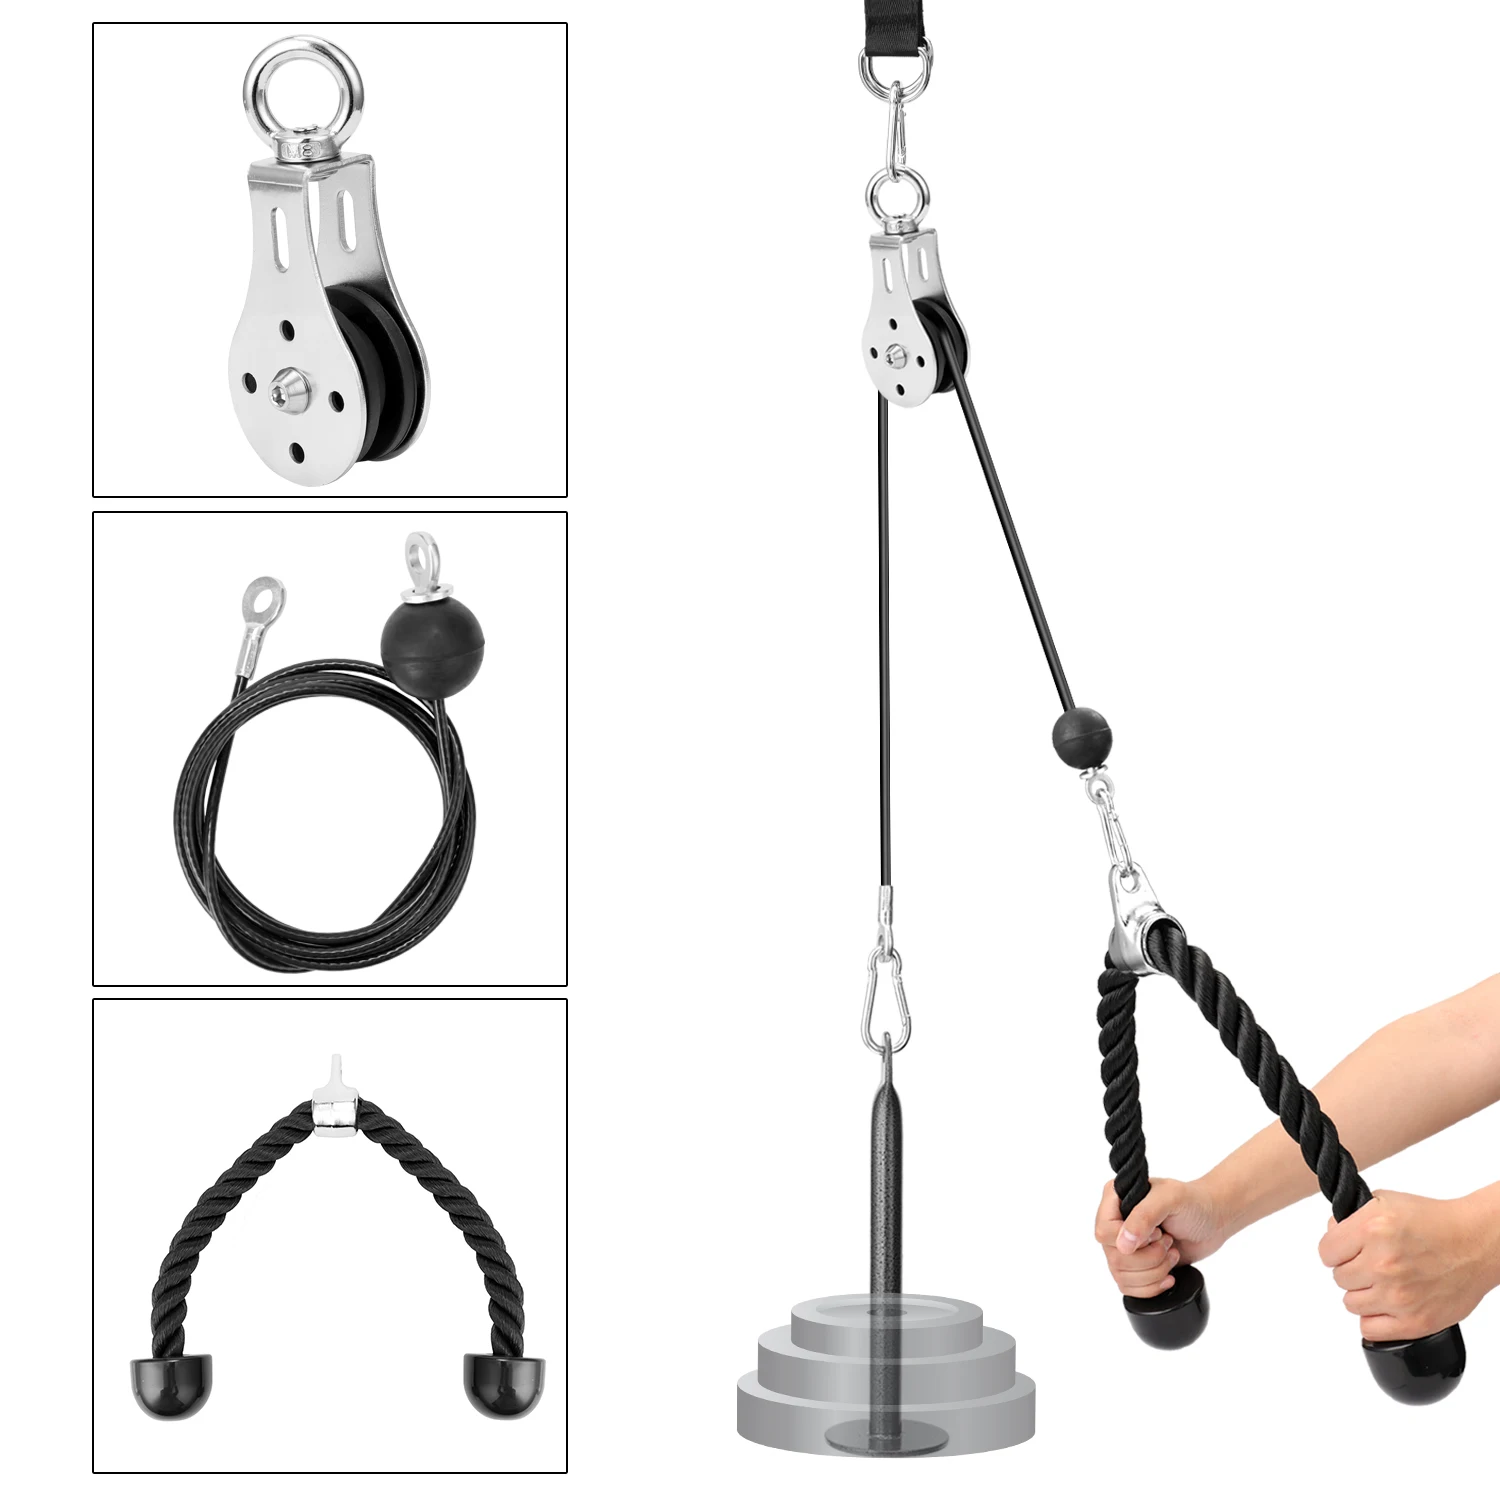 

Bandas Elasticas Fitness Equipment DIY Pulley Cable Machine Attachment System Lifting Arm Biceps Triceps Blaster Hand Strength